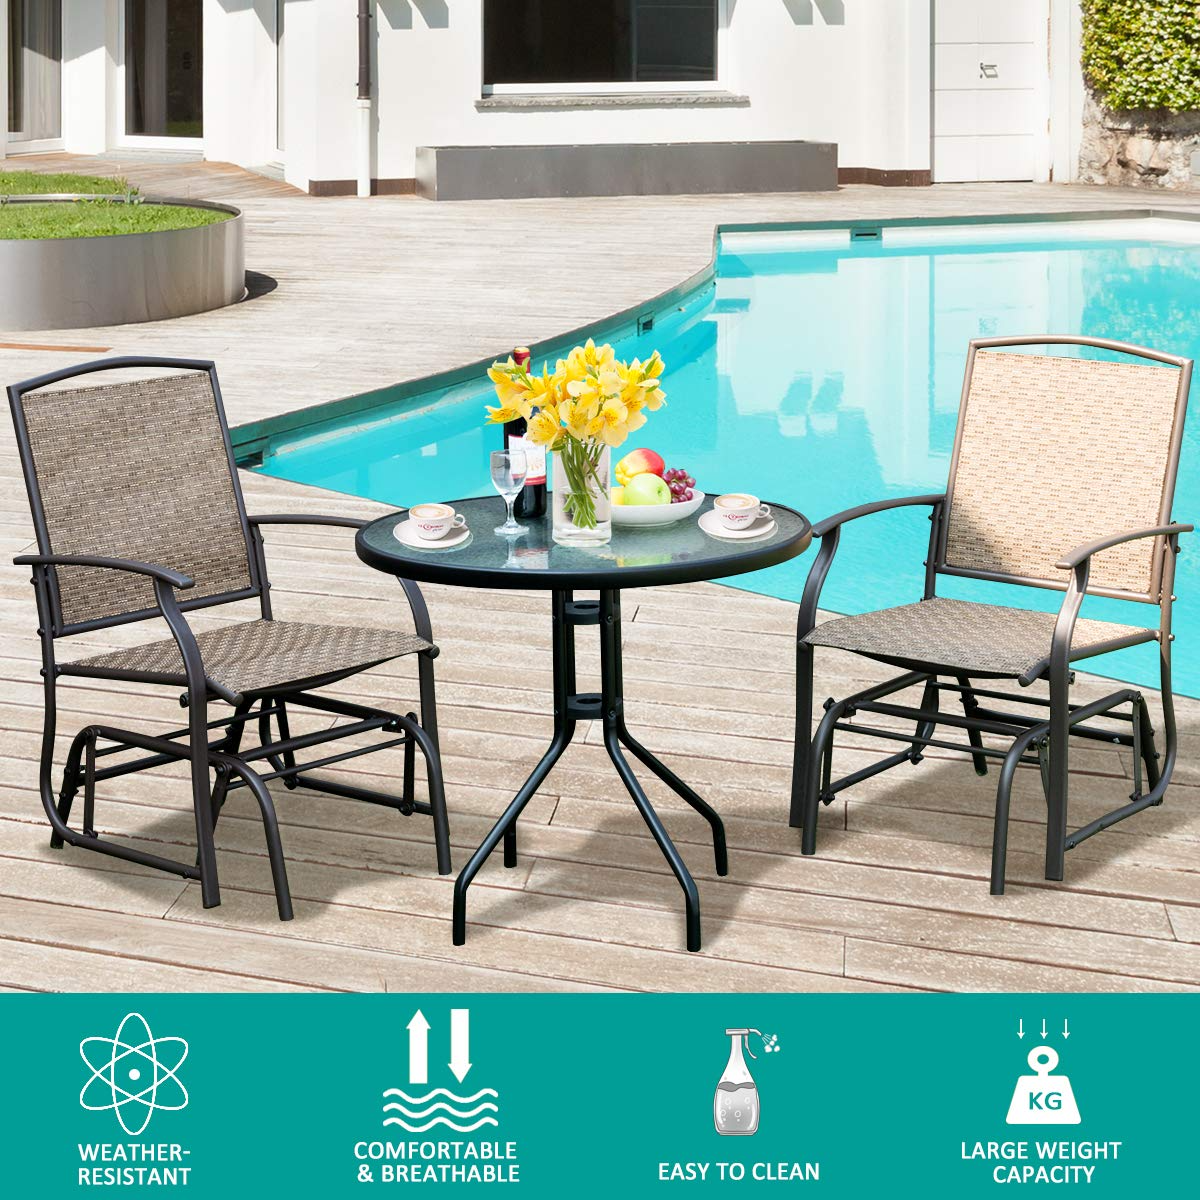 Giantex 3PCS Patio Swing Glider Set with One Glass Table W/Umbrella Hole & Two Rocking Chairs 3 -Piece